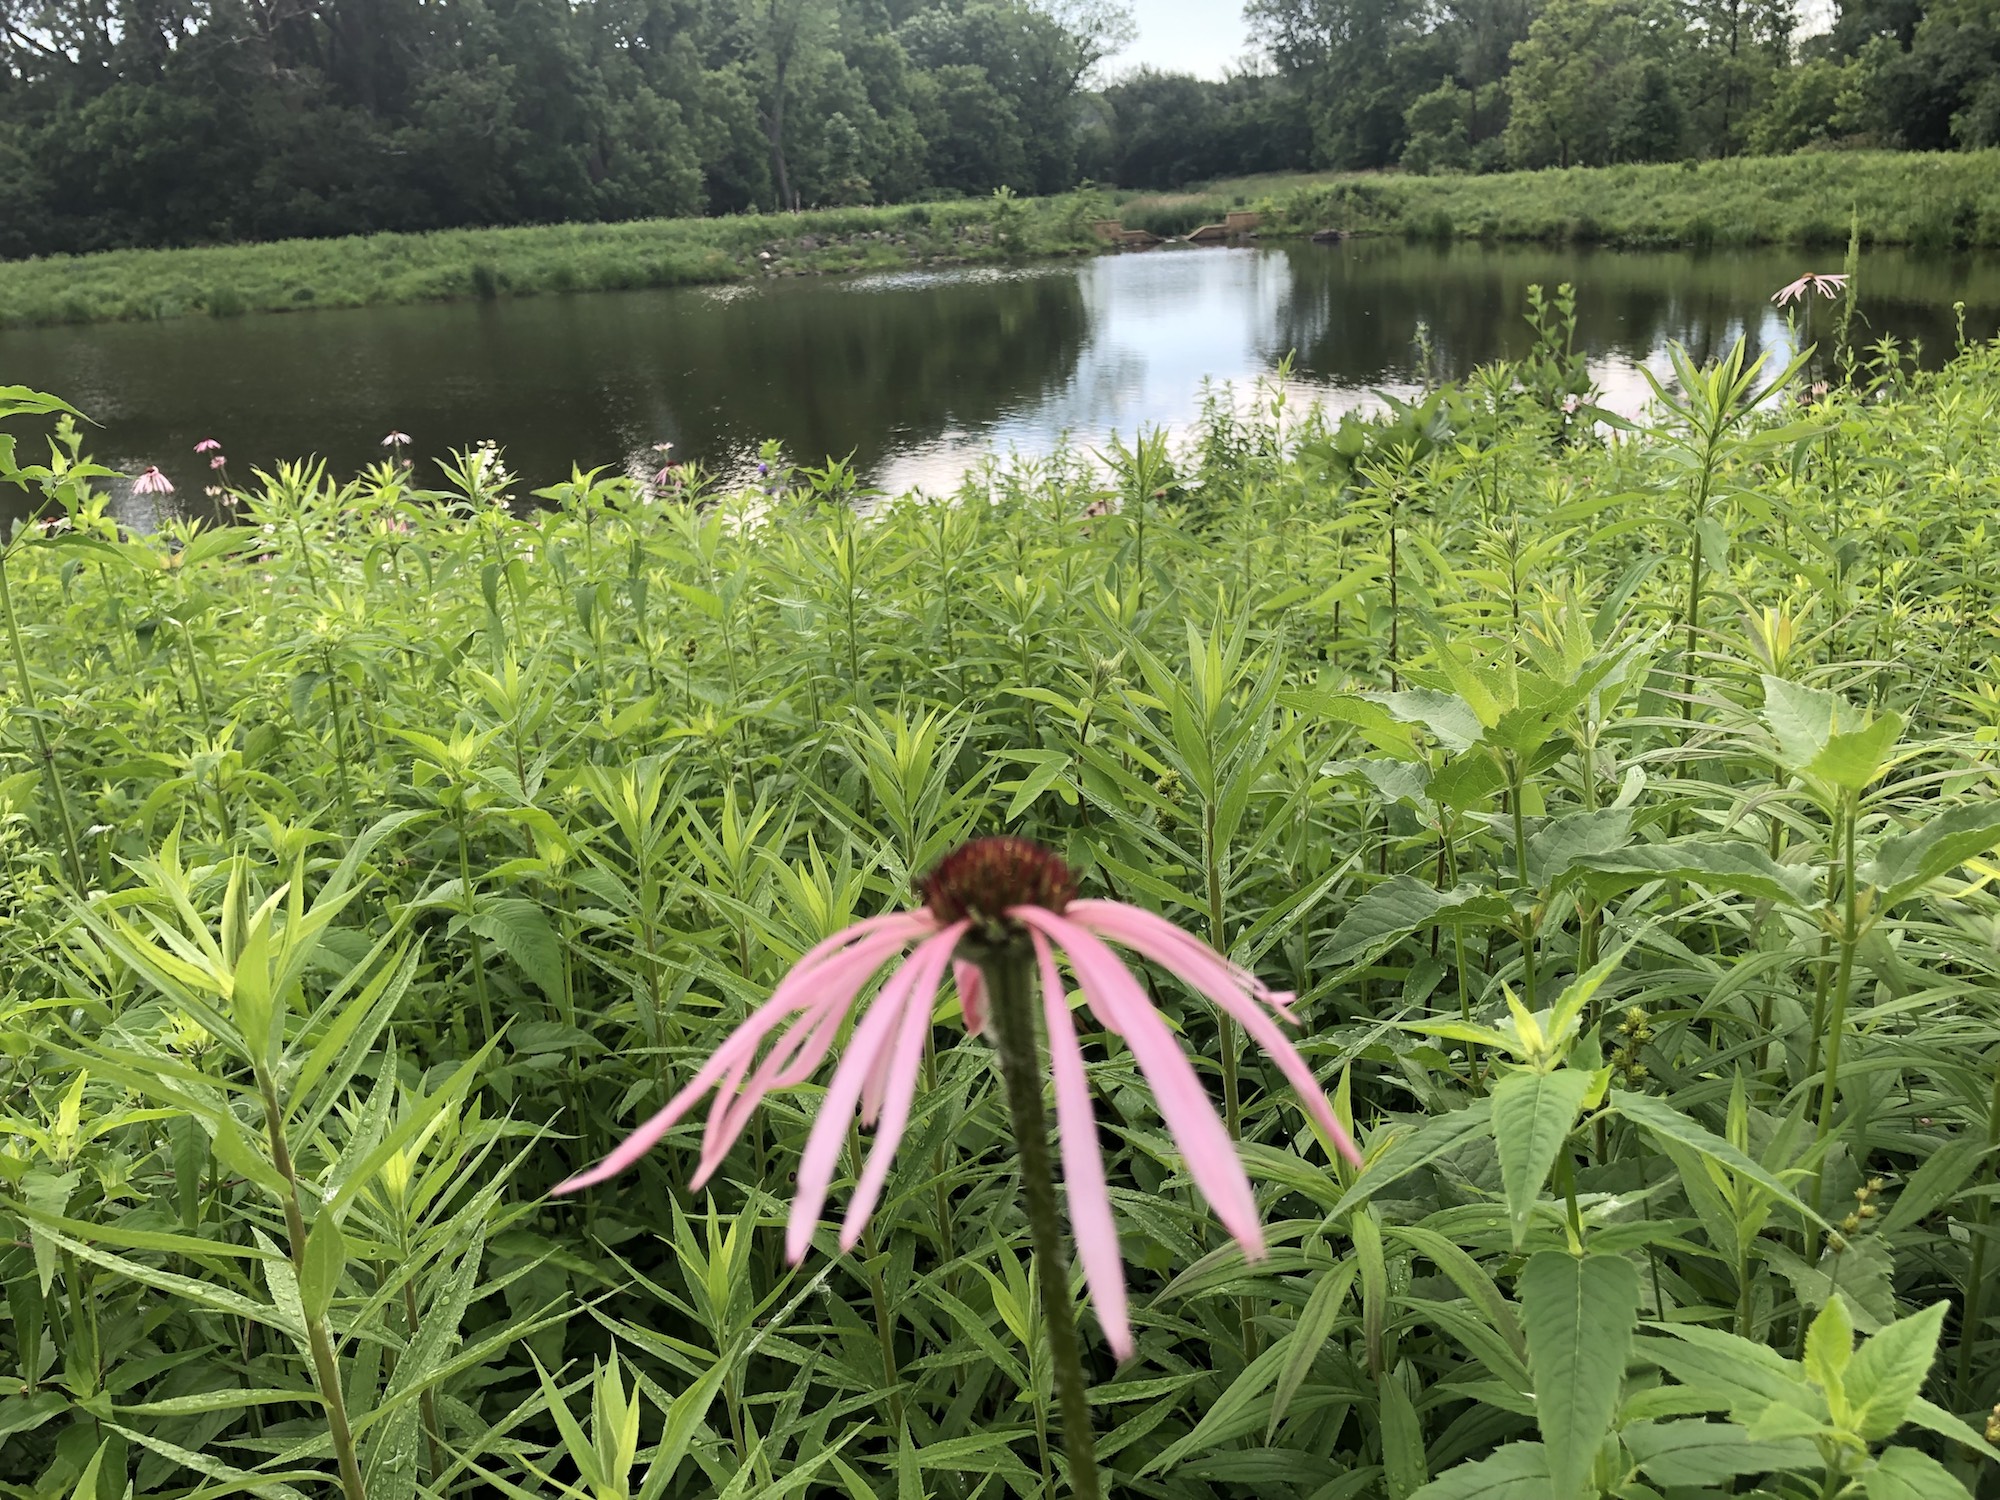 Pale purple coneflower on bank of Retaining Pond on corner of Nakoma Road and Manitou Way on June 25, 2019.